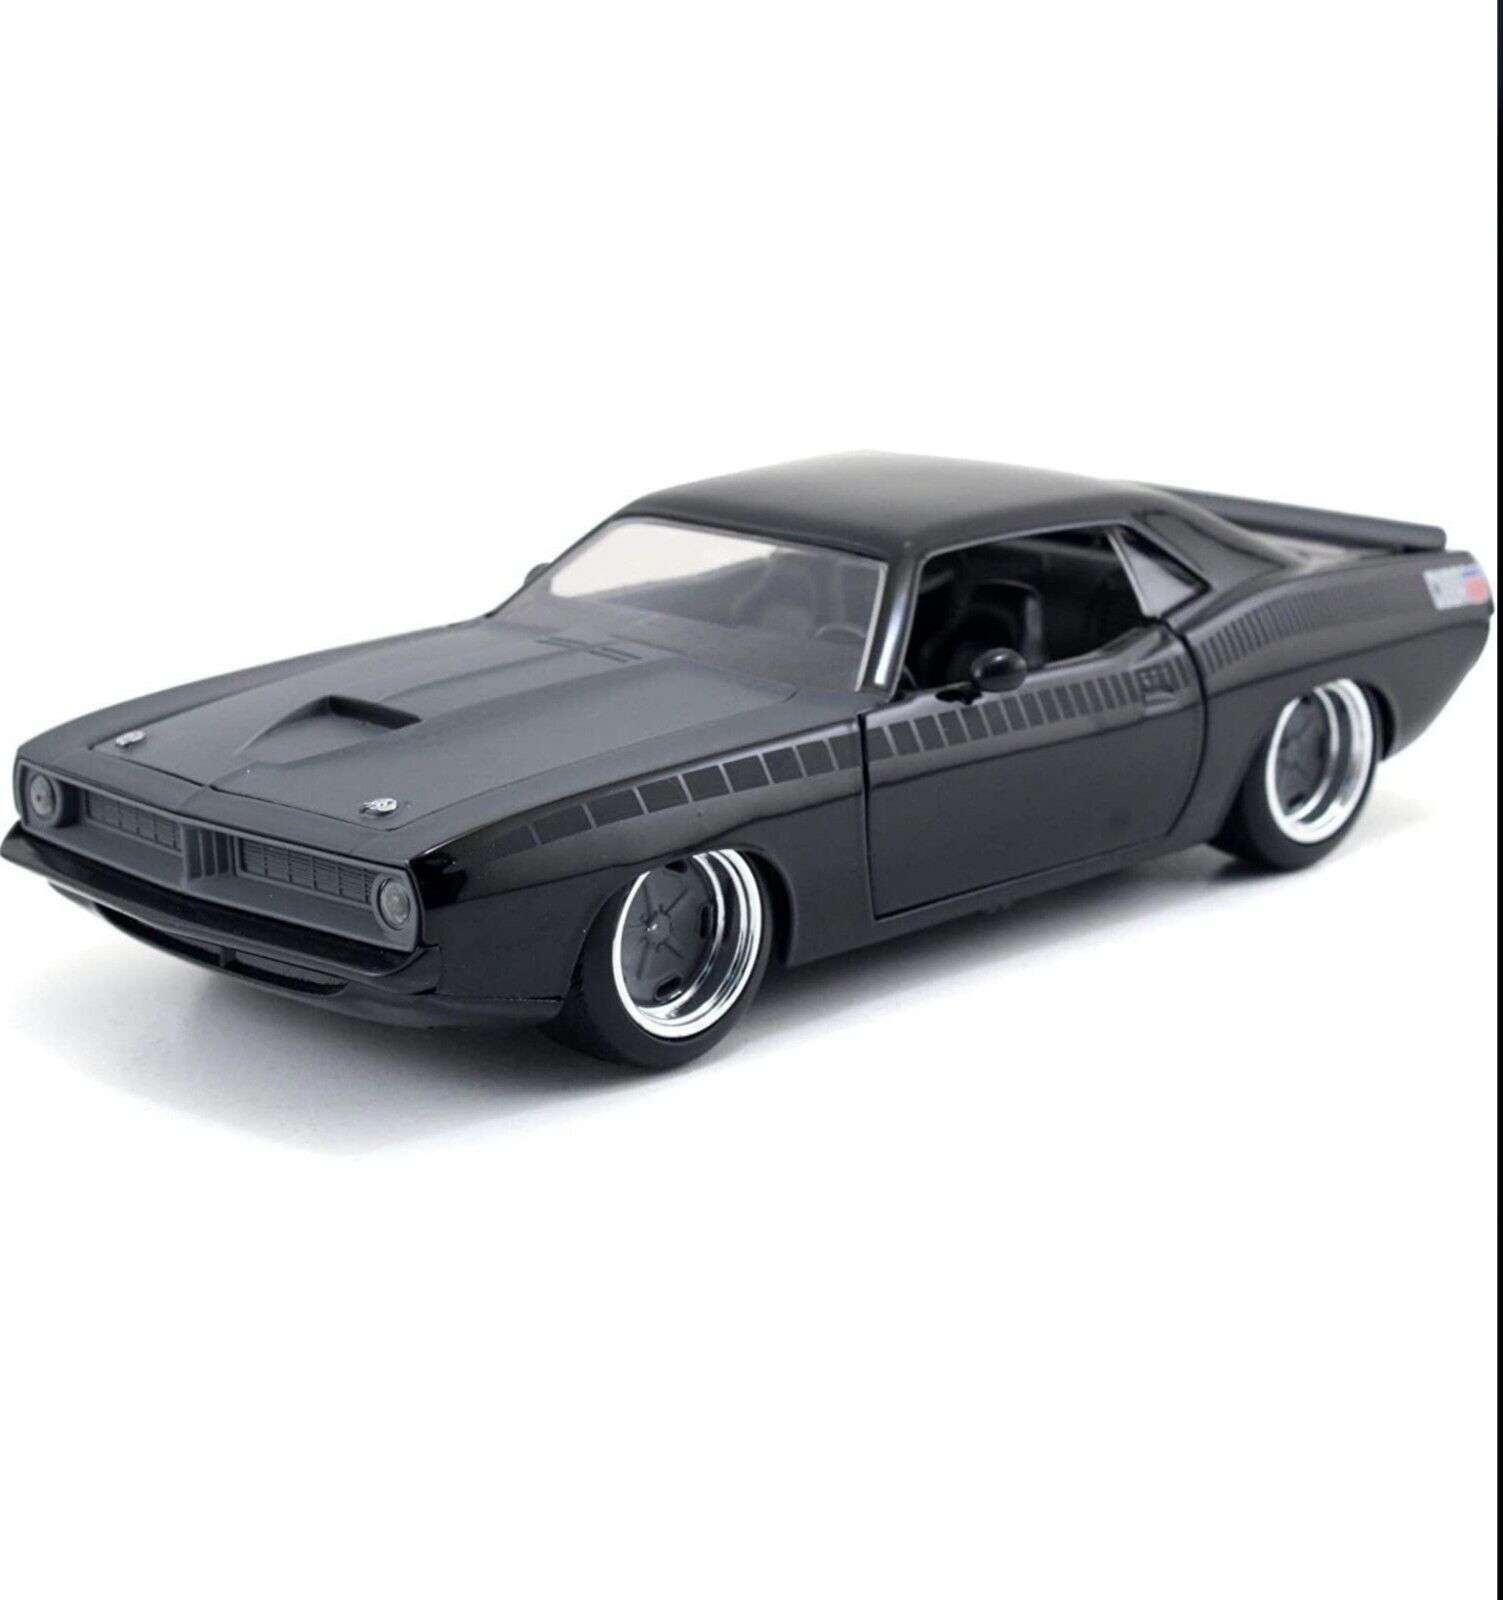 NEW JADA DIECAST FAST & FURIOUS 7 LETTY\'S PLYMOUTH BARACUDA MAT BLACK 1:24 SCALE